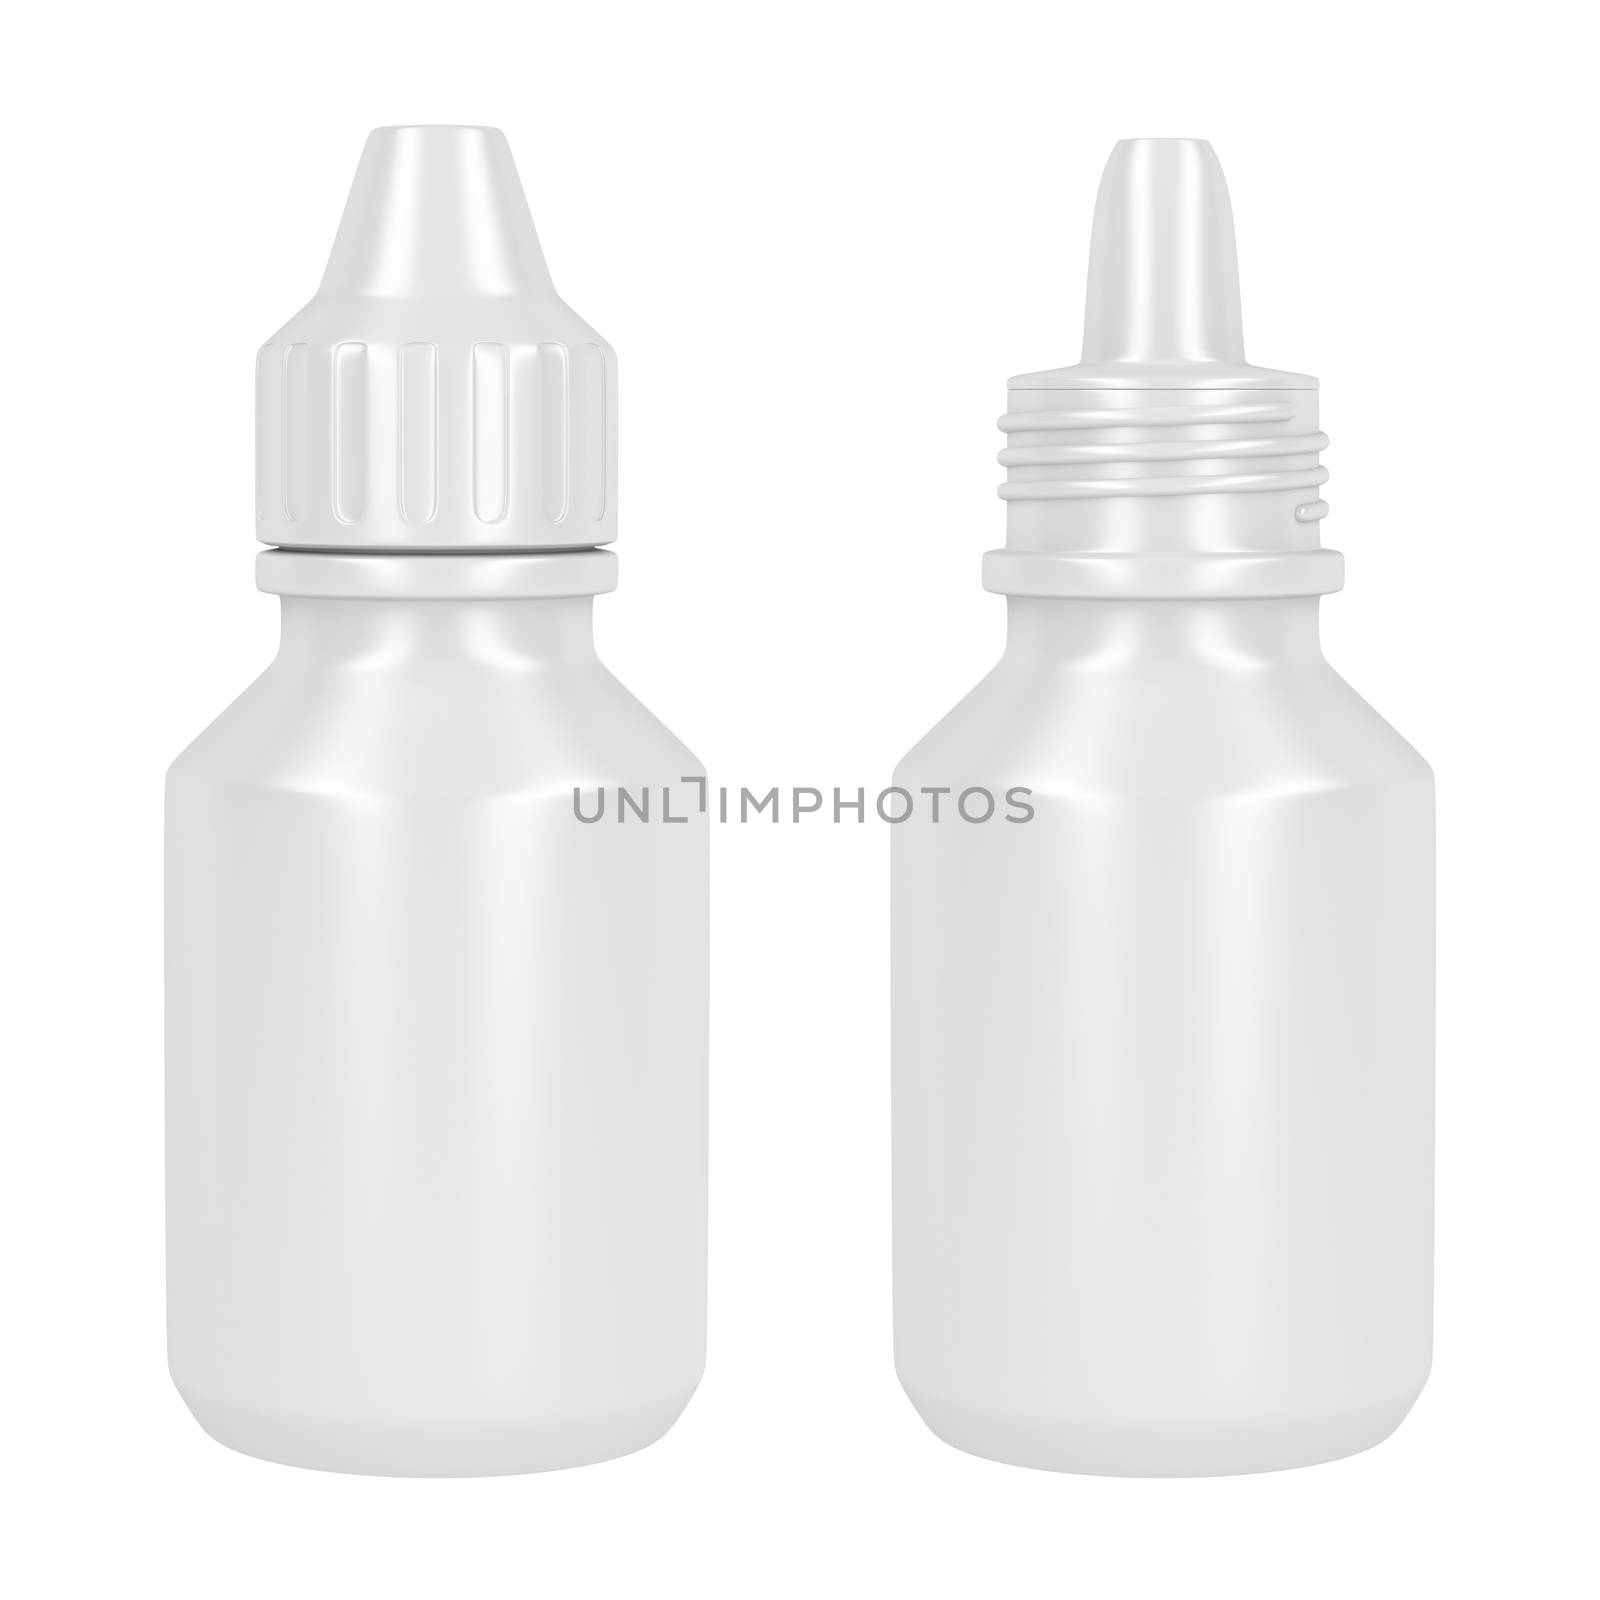 Open and closed containers for eye drop, isolated on white